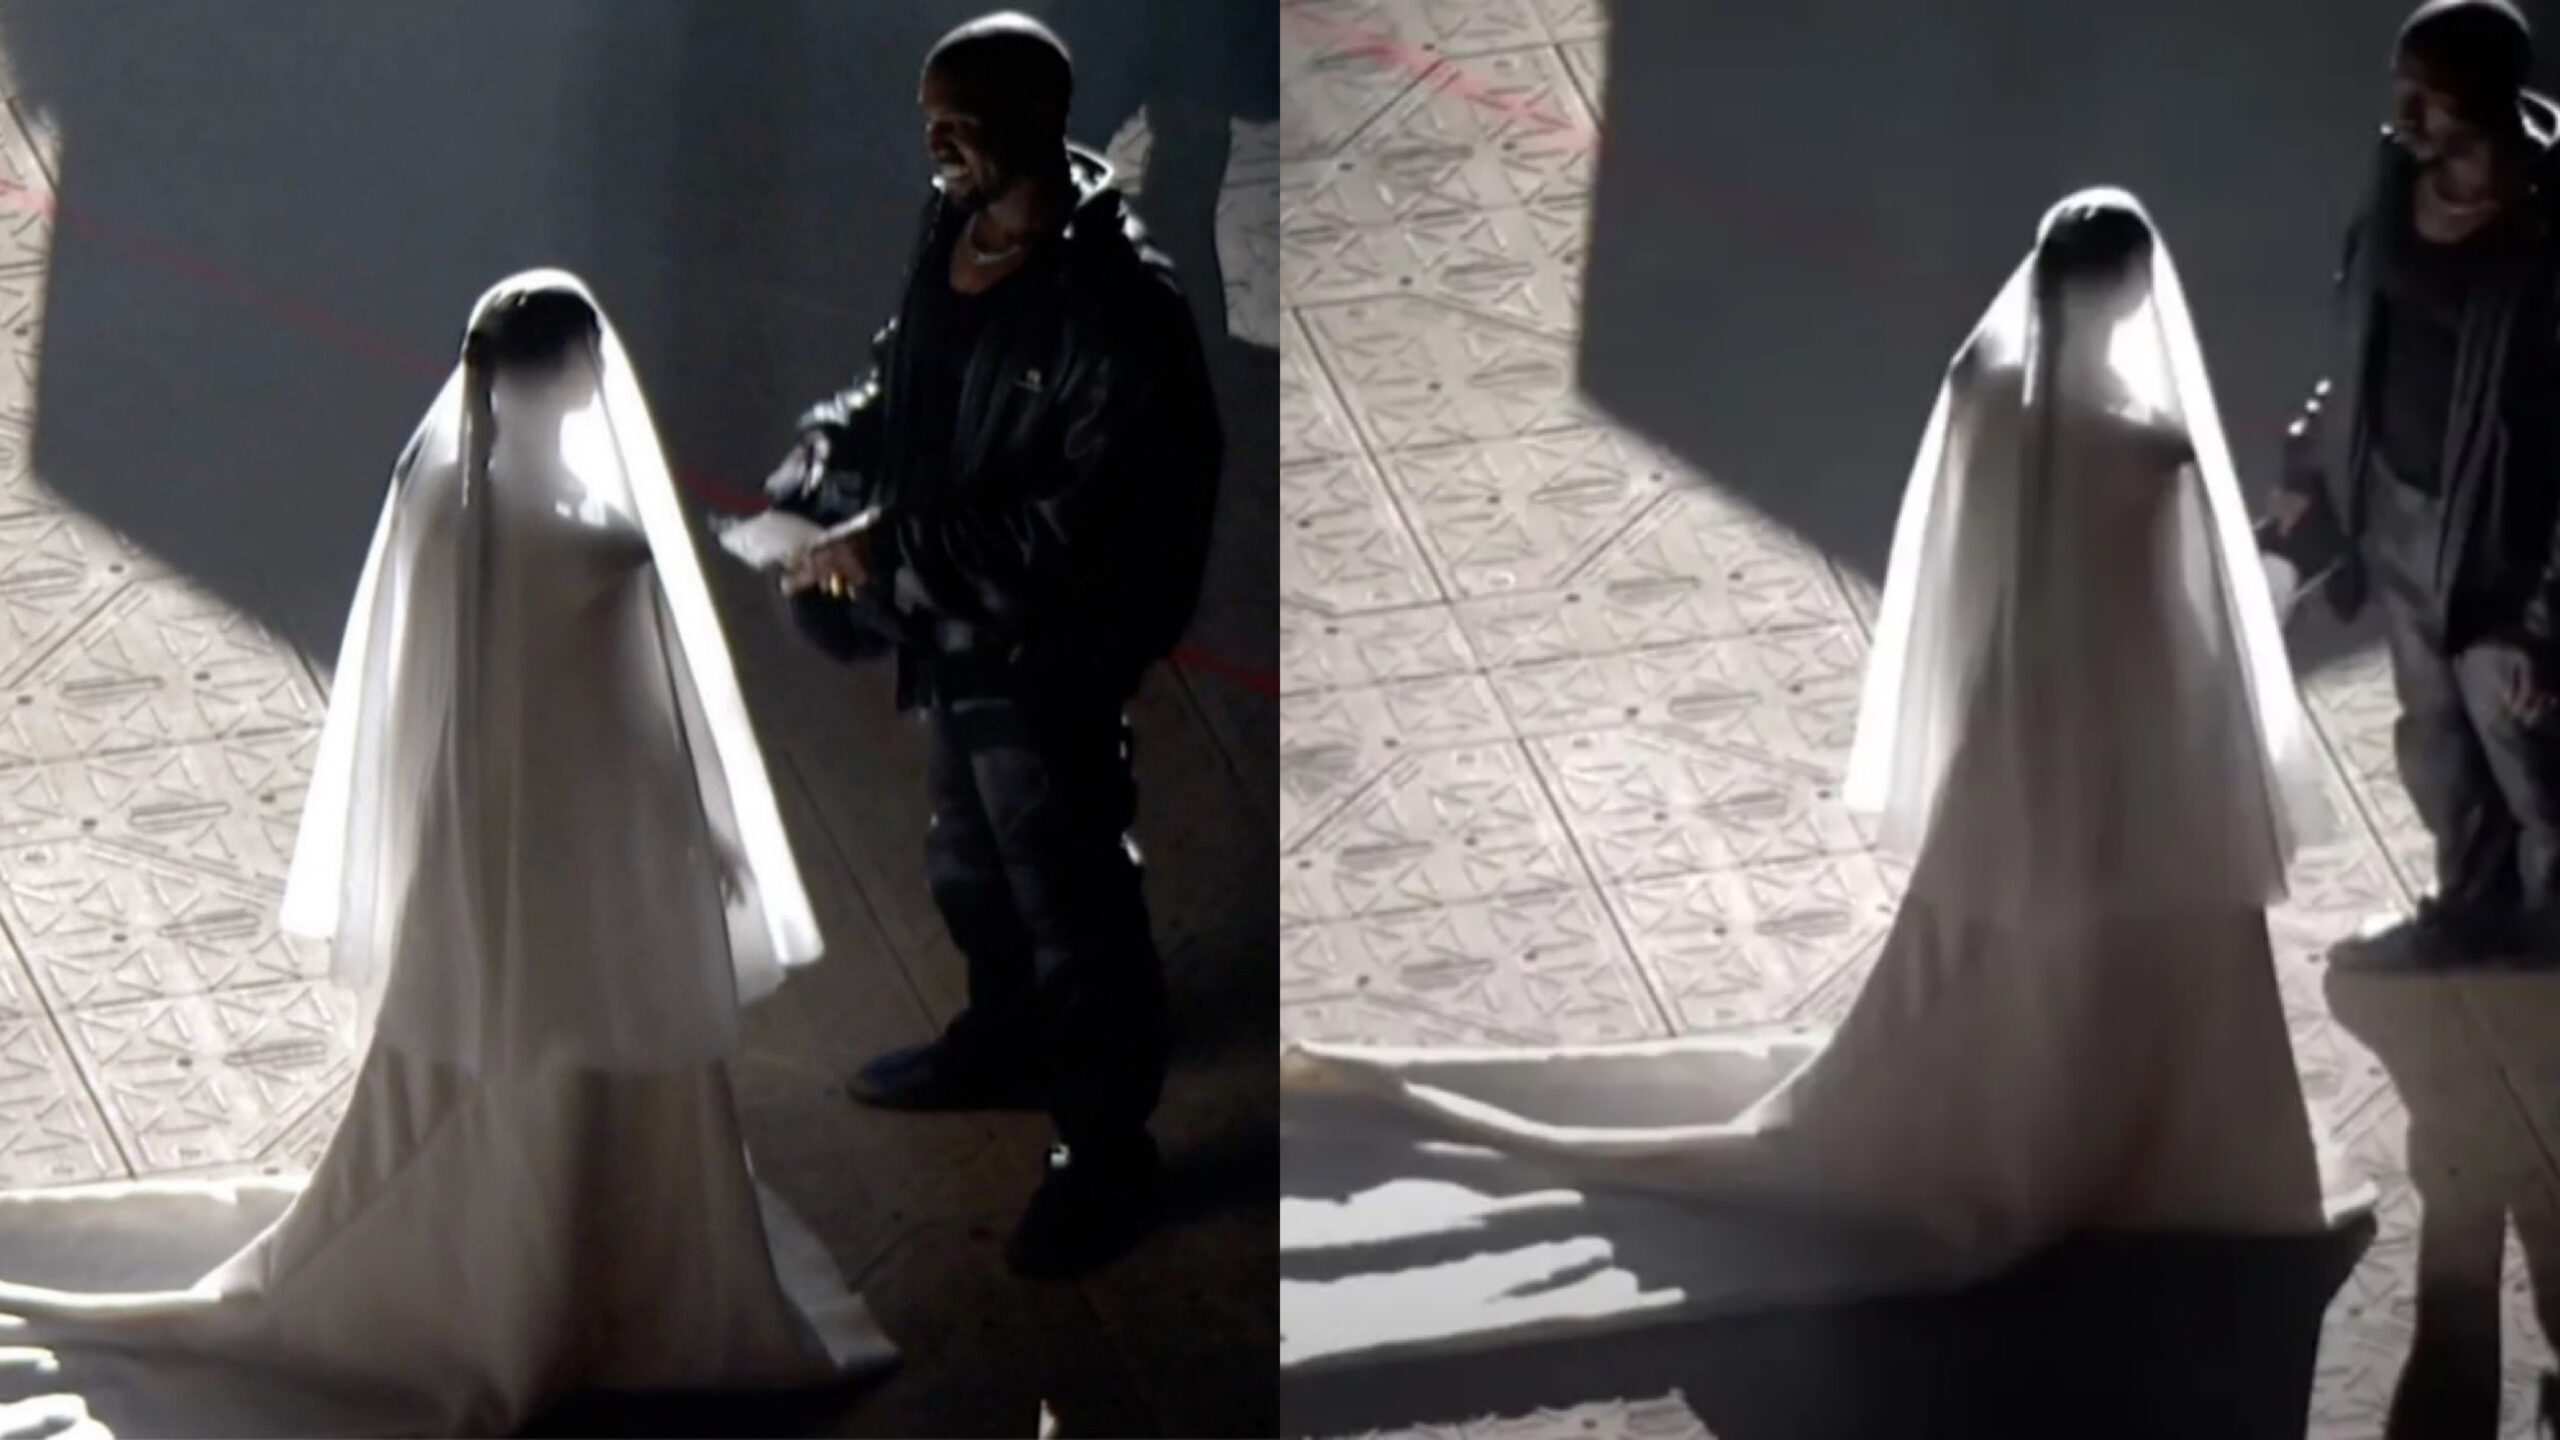 Kim Kardashian Appears In Wedding Dress And Veil For Kanye’s ‘Donda’ Event Amid Divorce [Video]